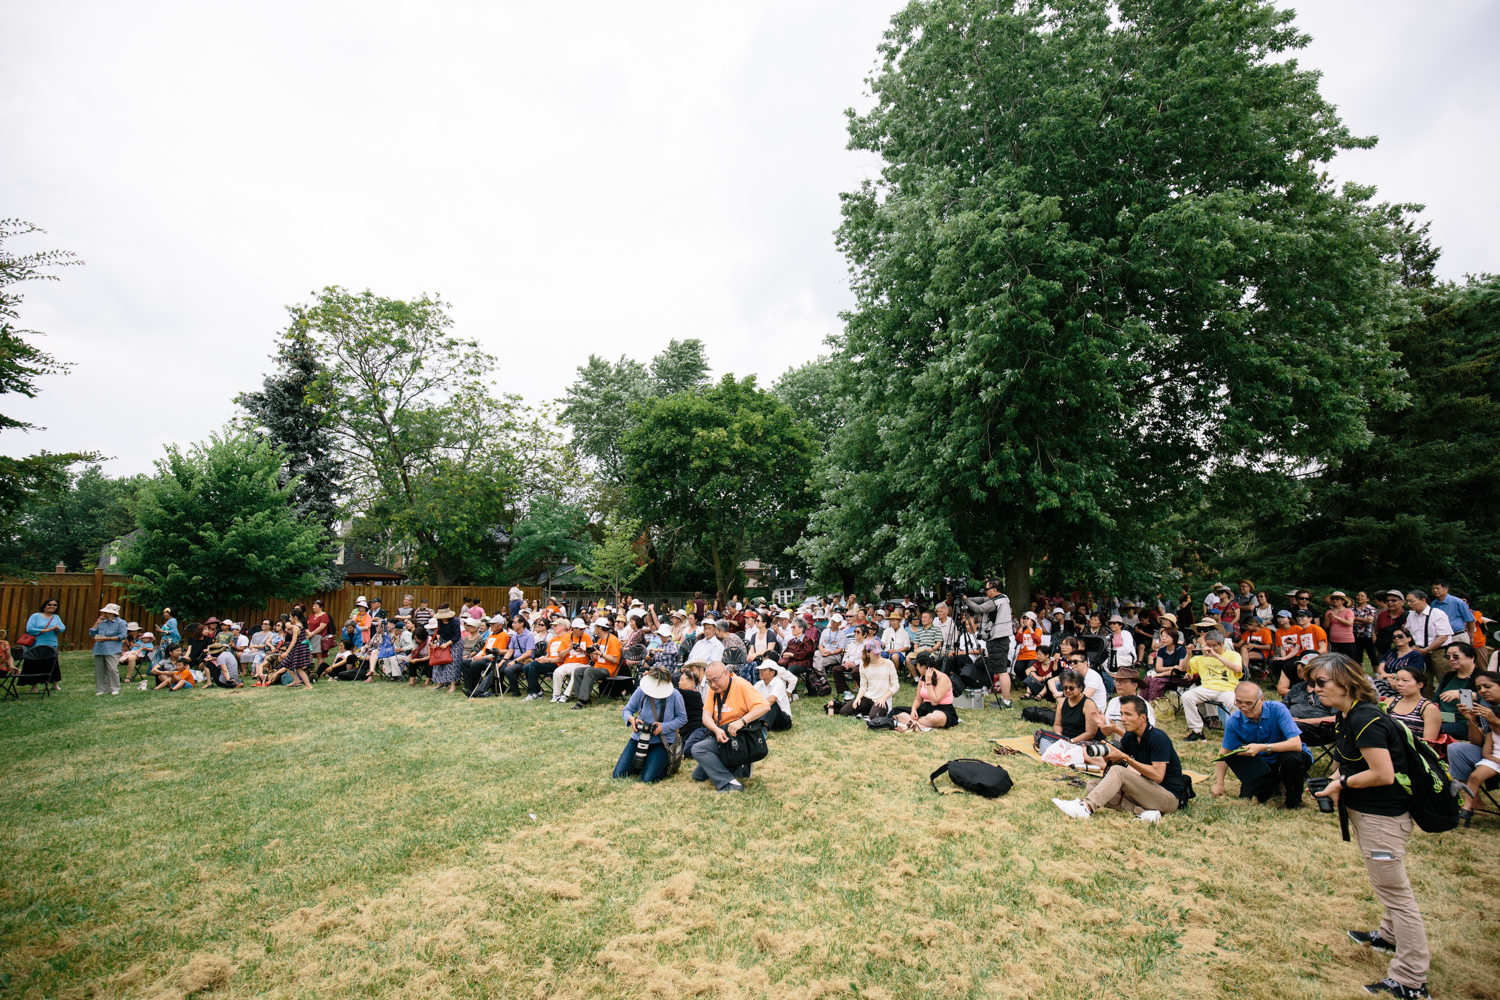 A large crowd sits under a group of trees to watch an event.